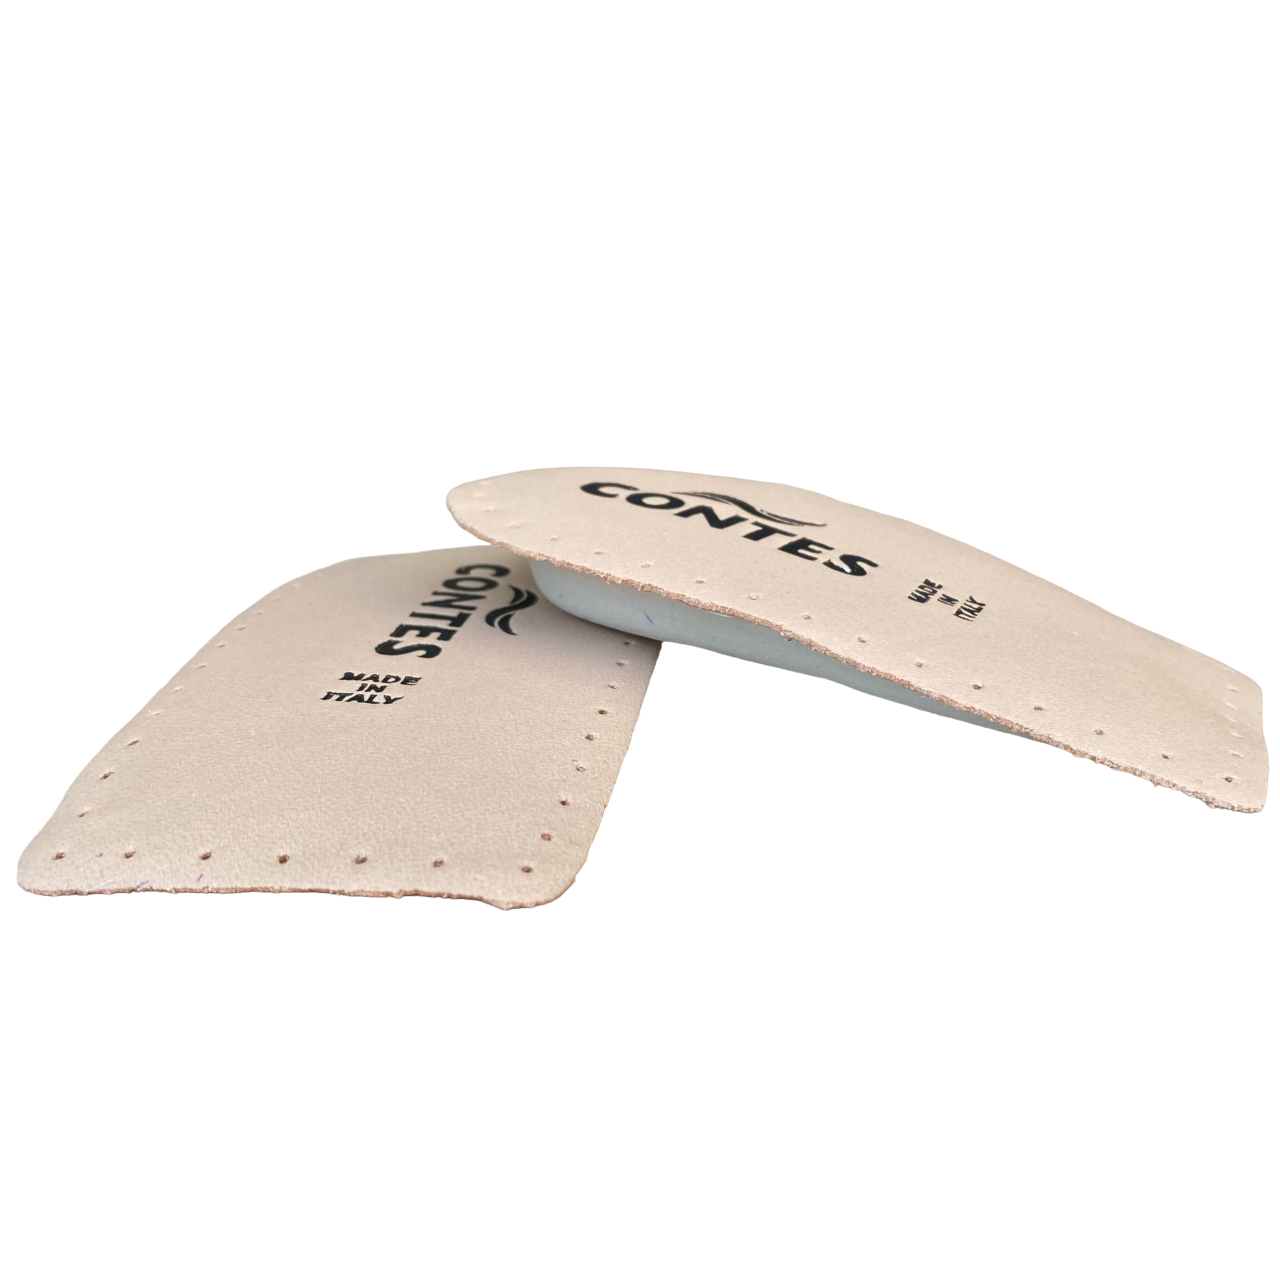 Contes Heel lift in latex foam covered with real chrome-free leather with a thickness of approximately 1.5 cm at the heel. 121/P